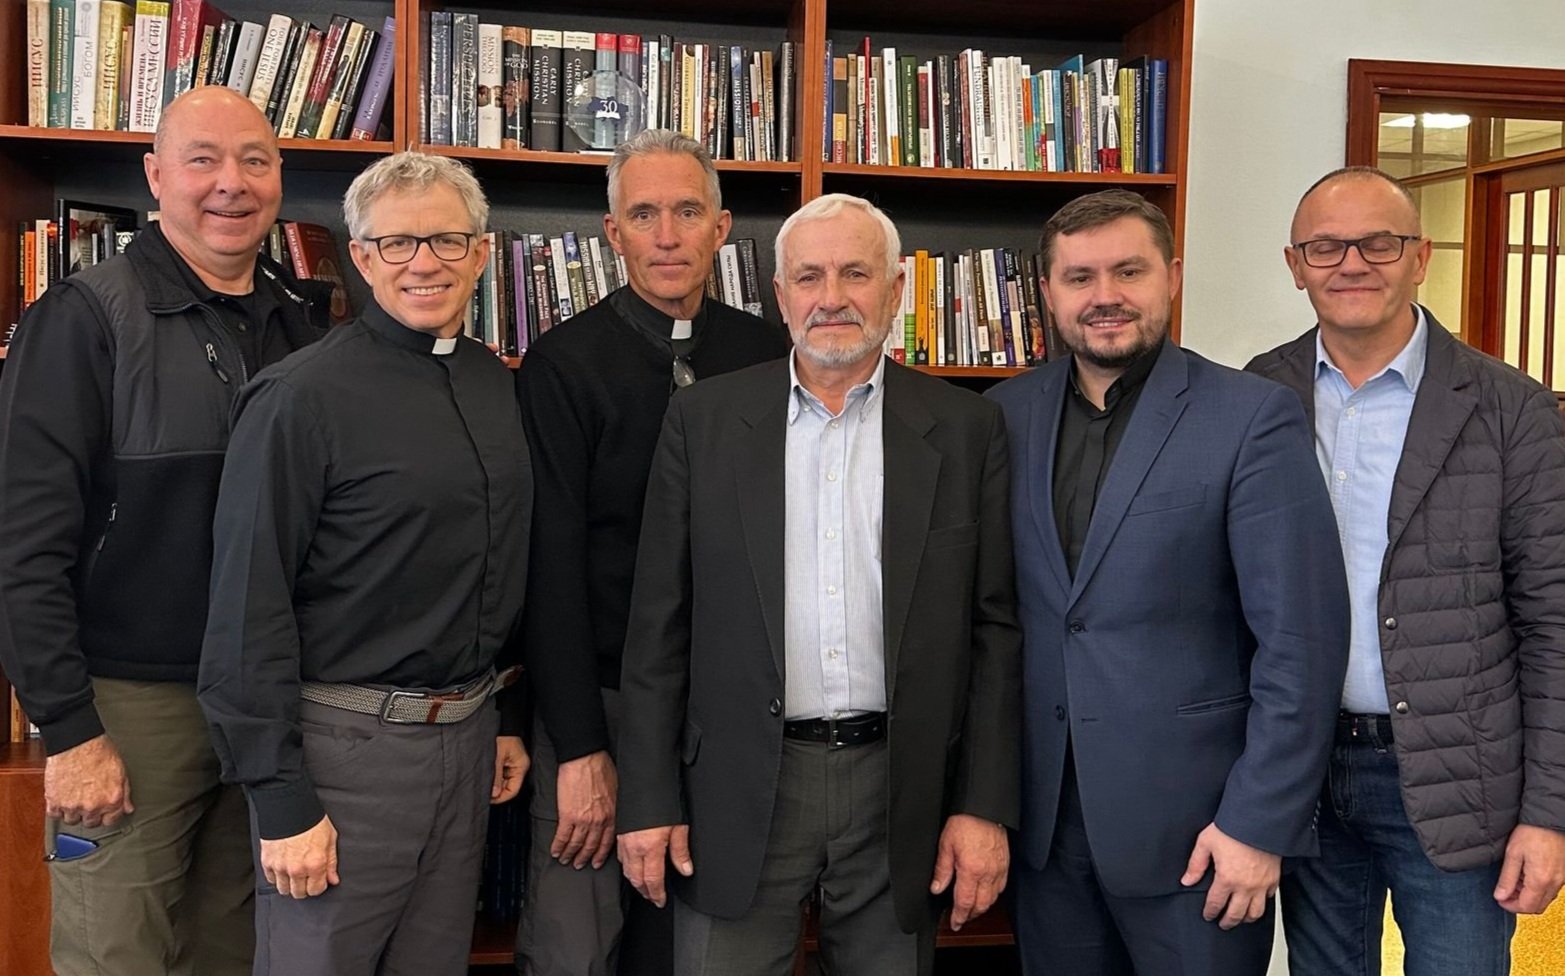 The Outreach Foundation team meets with Rev. Oleksandr Zaitsev, bishop of the Ukrainian Evangelical Church